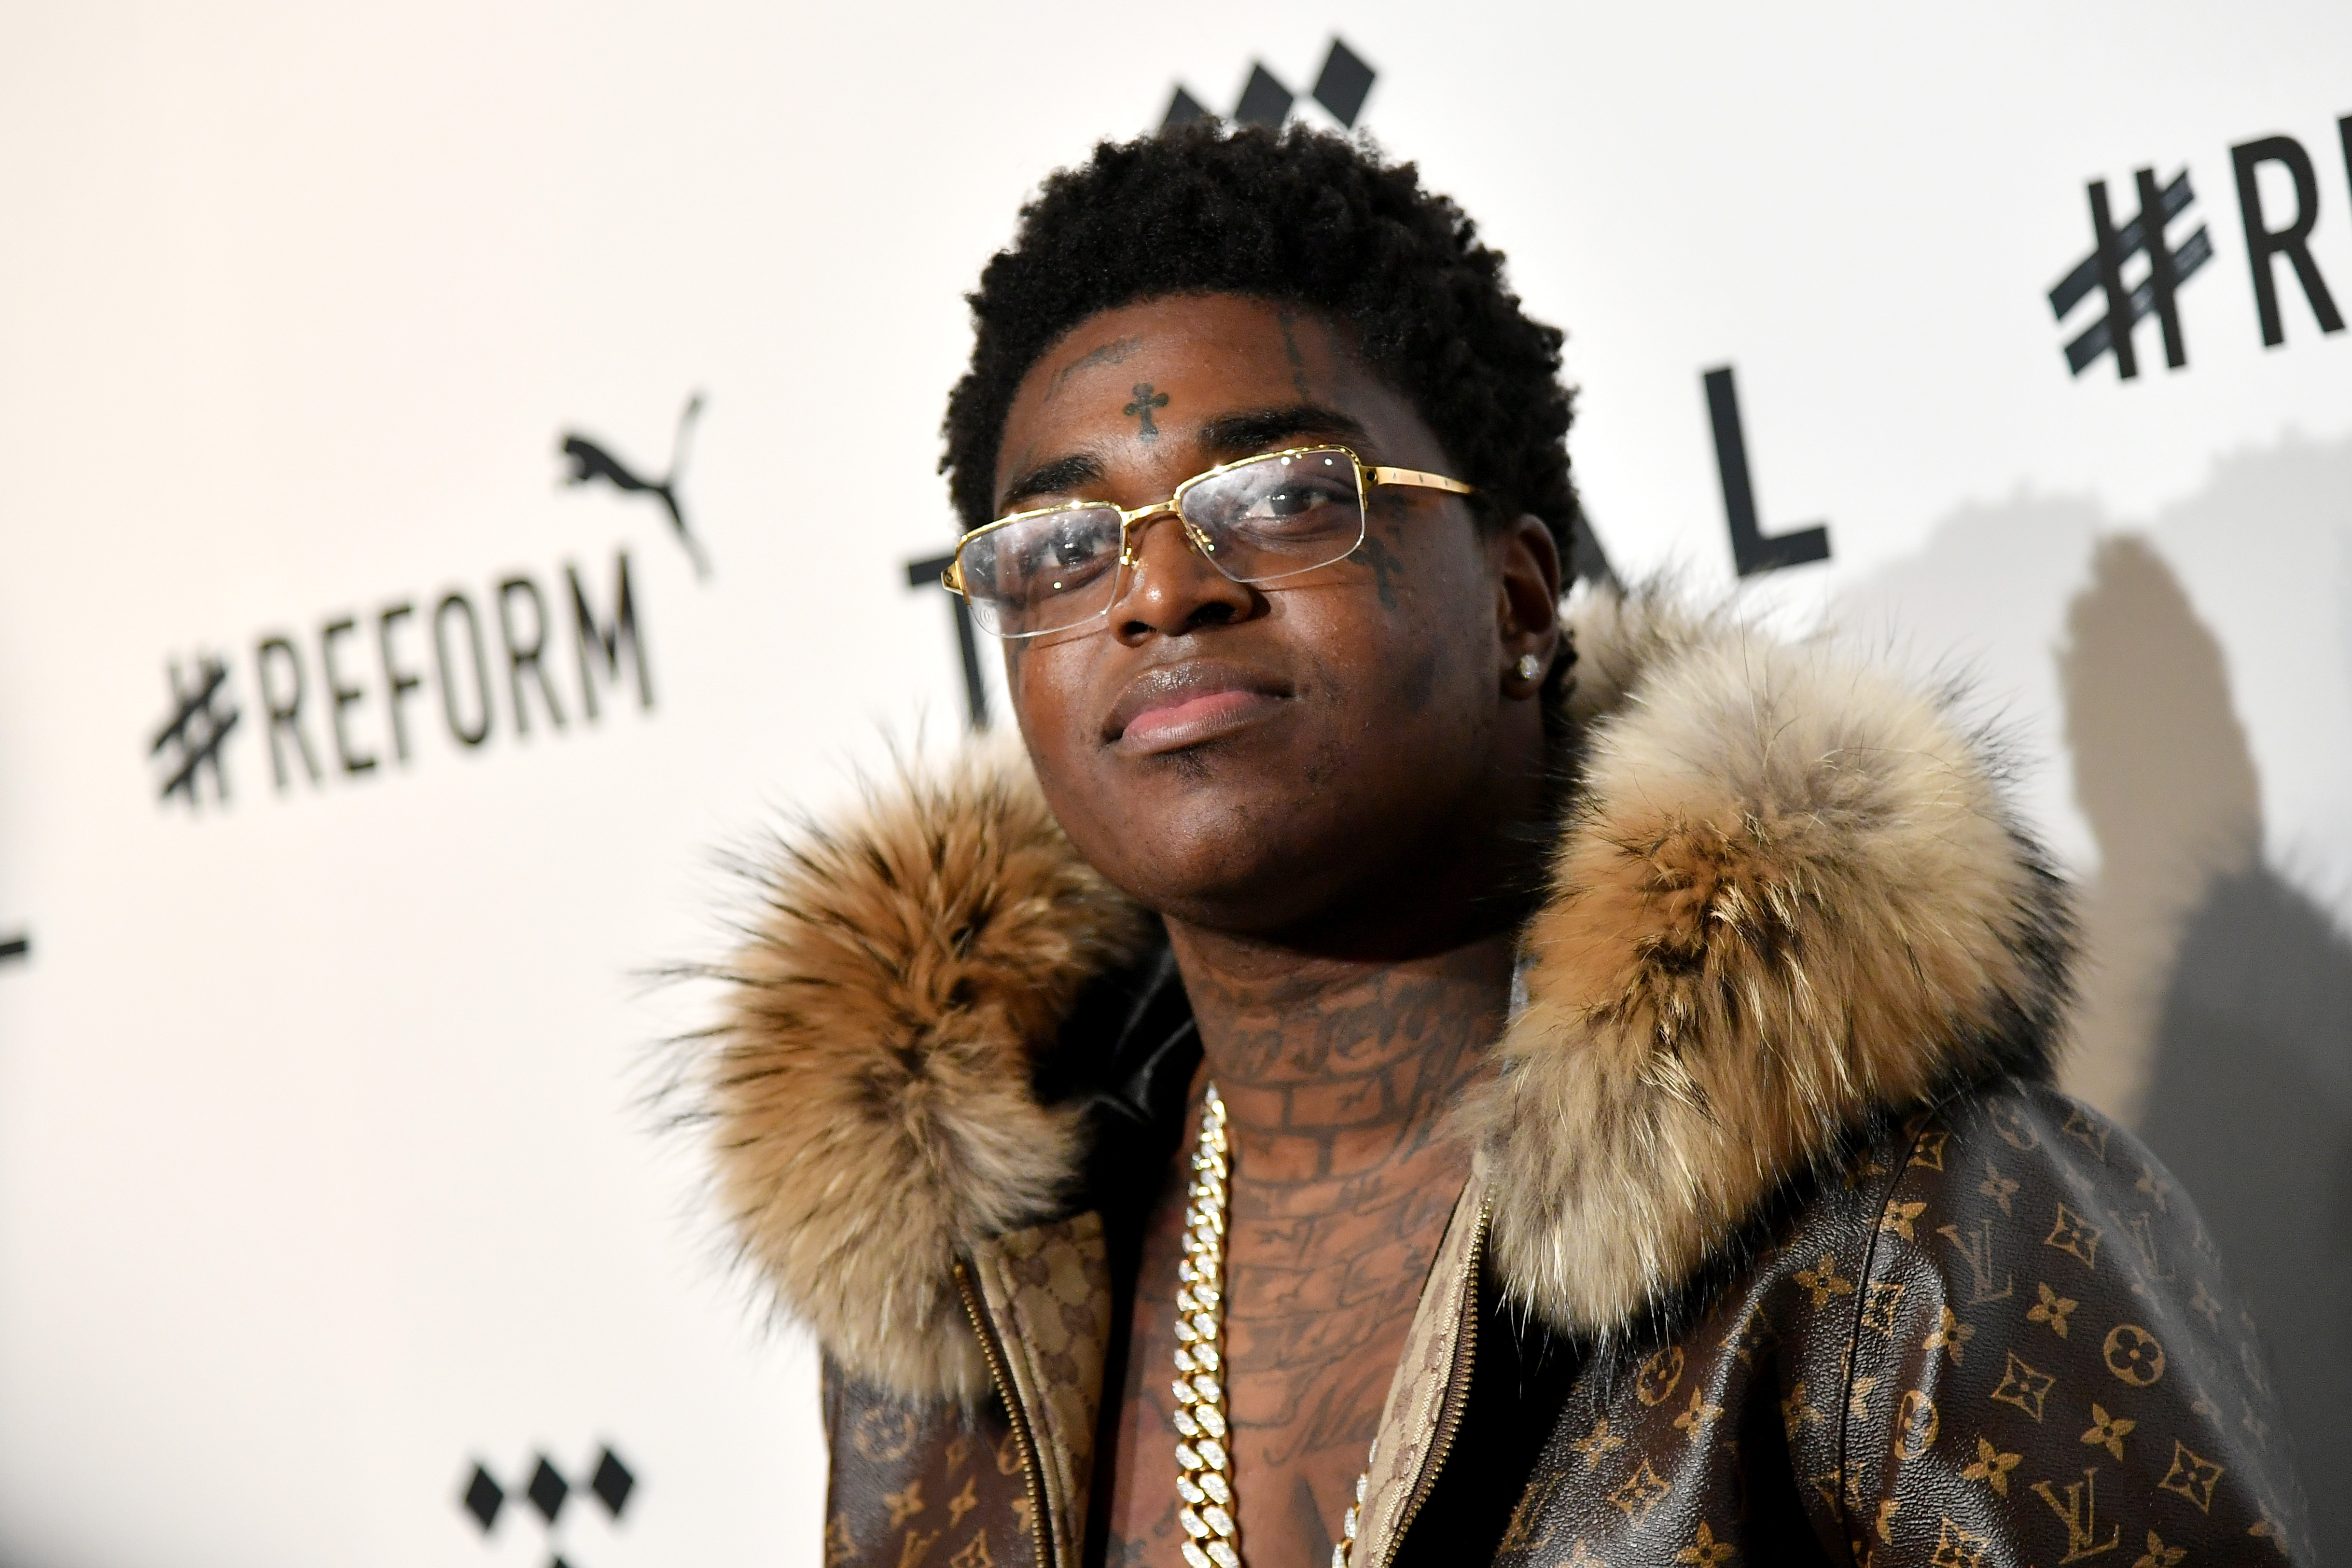 Kodak Black at the 4th Annual TIDAL X: Brooklyn on October 23, 2018, in New York City. | Source: Getty Images